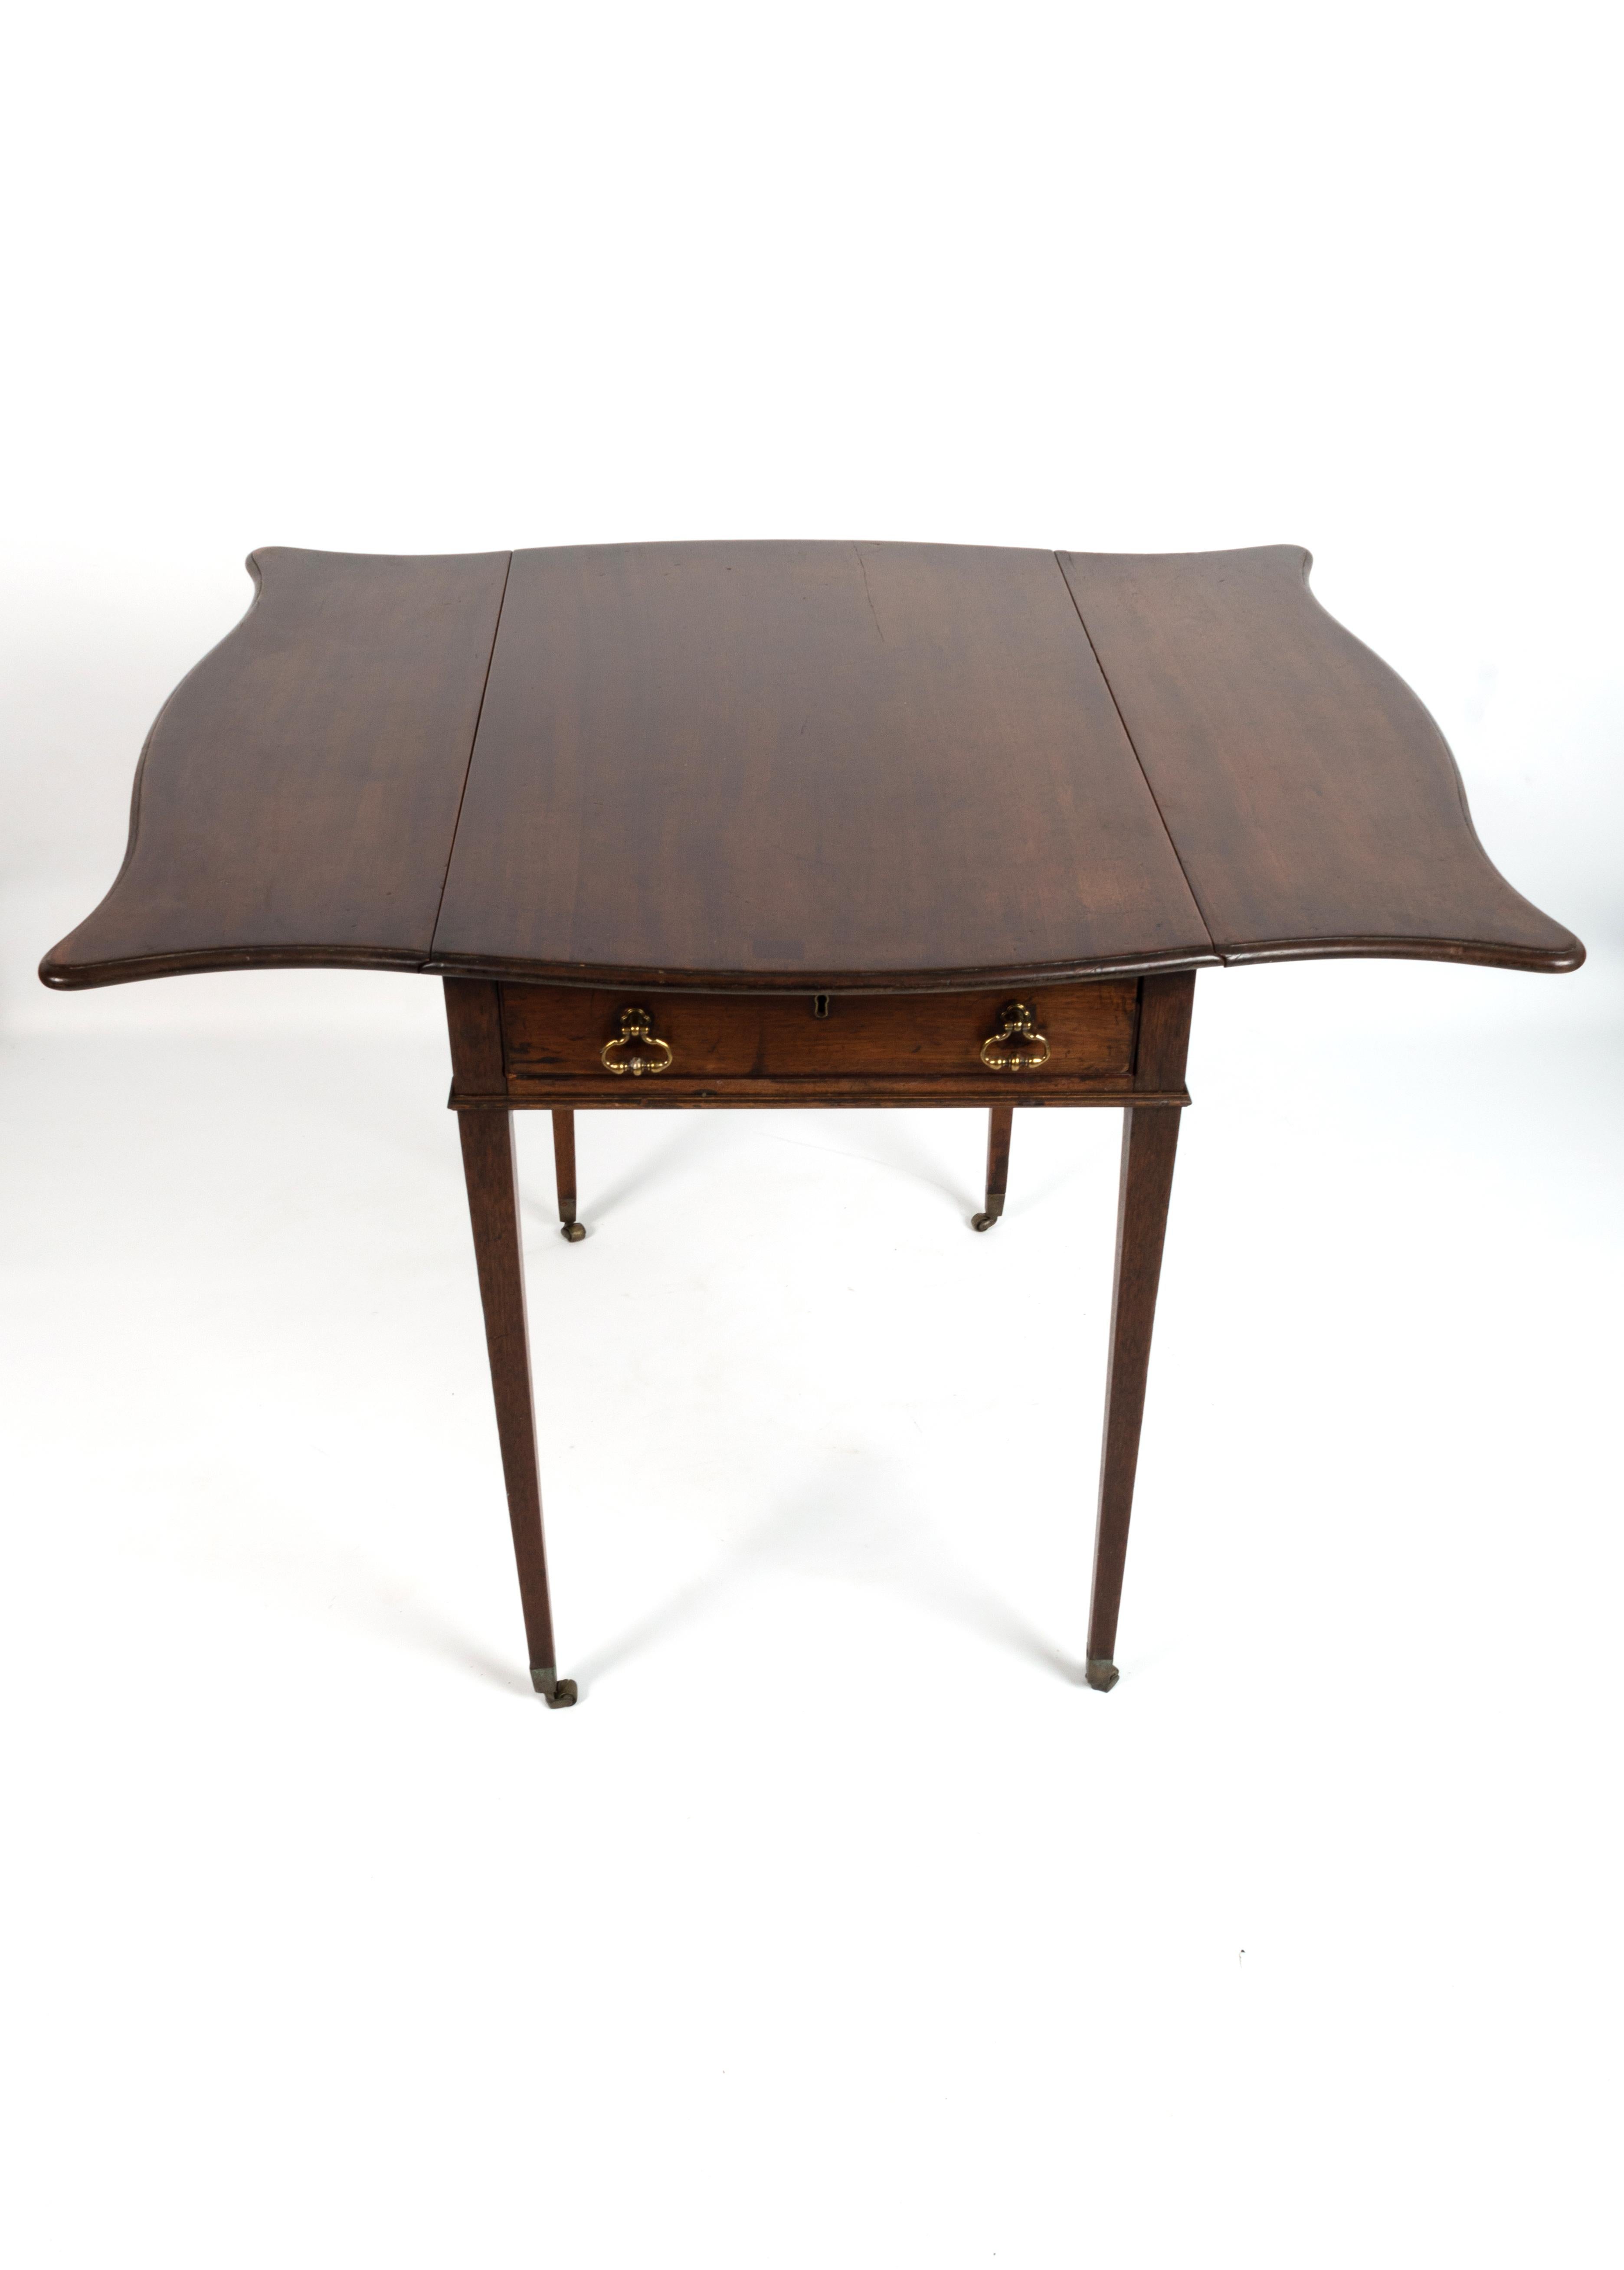 Antique English 18th Century George III Mahogany Butterfly Pembroke Table C.1780 For Sale 1